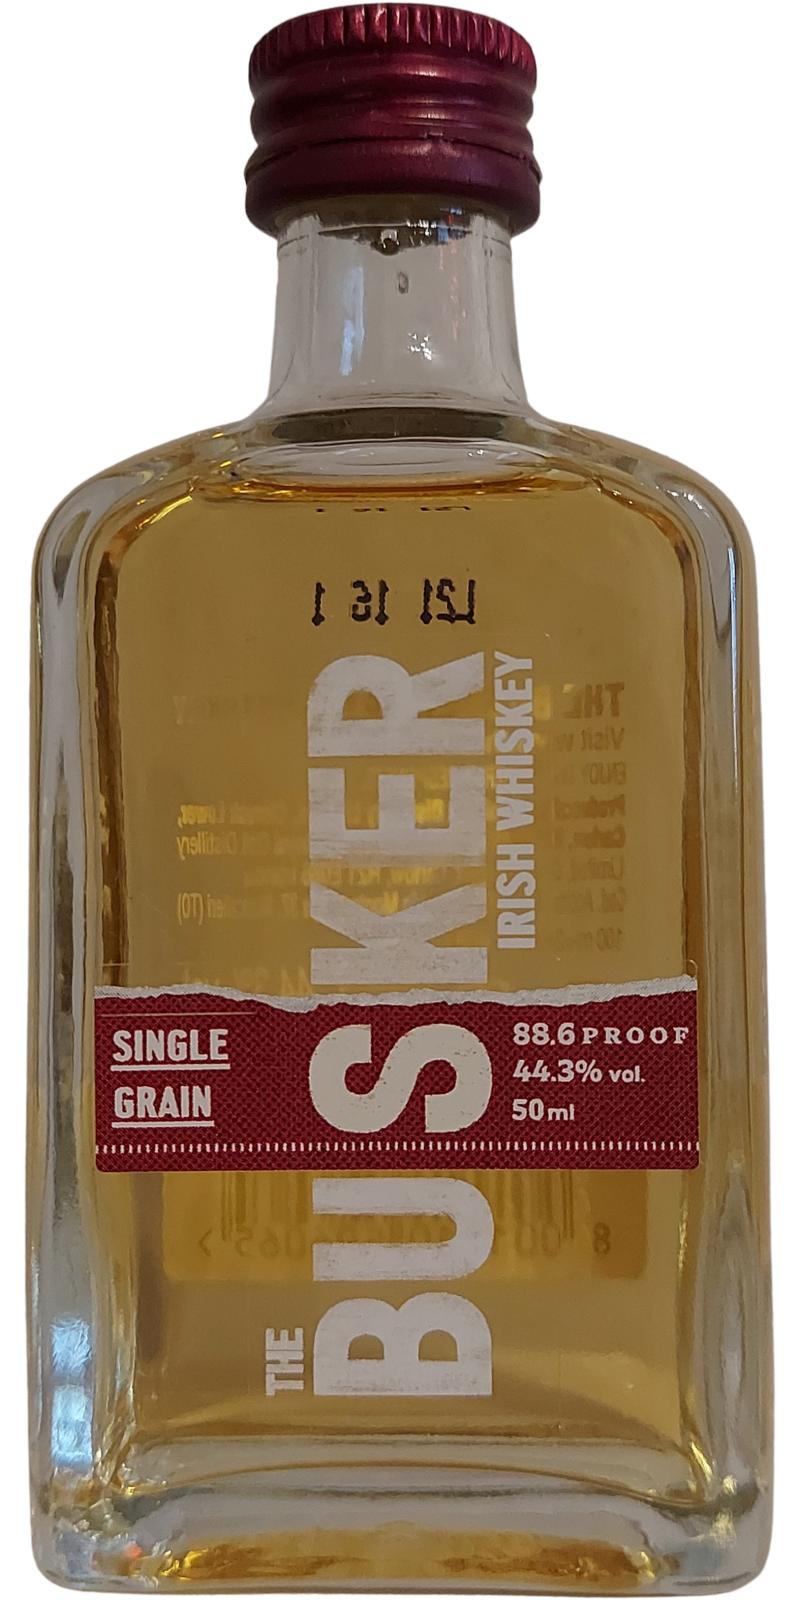 The Busker Single Grain - Ratings and reviews - Whiskybase